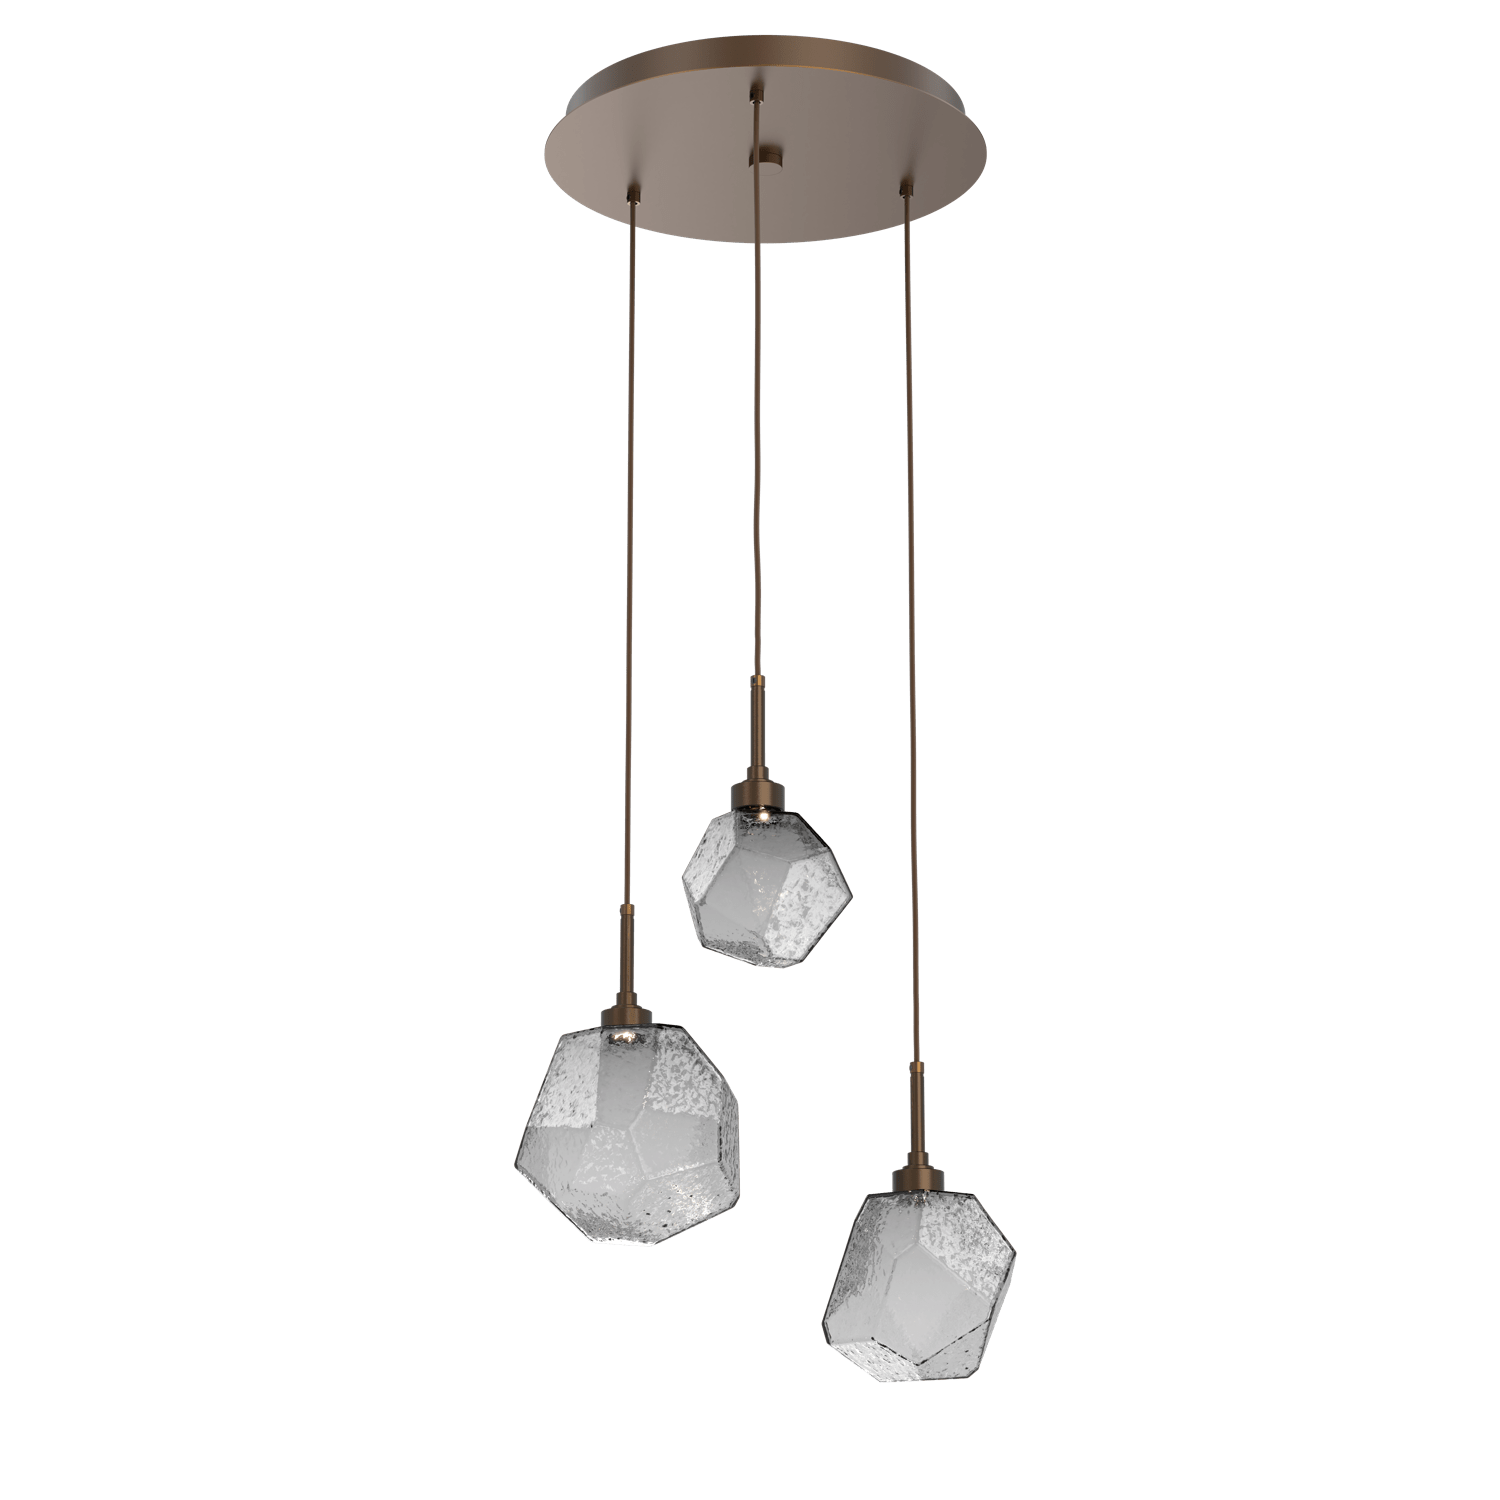 CHB0039-03-FB-S-Hammerton-Studio-Gem-3-light-round-pendant-chandelier-with-flat-bronze-finish-and-smoke-blown-glass-shades-and-LED-lamping